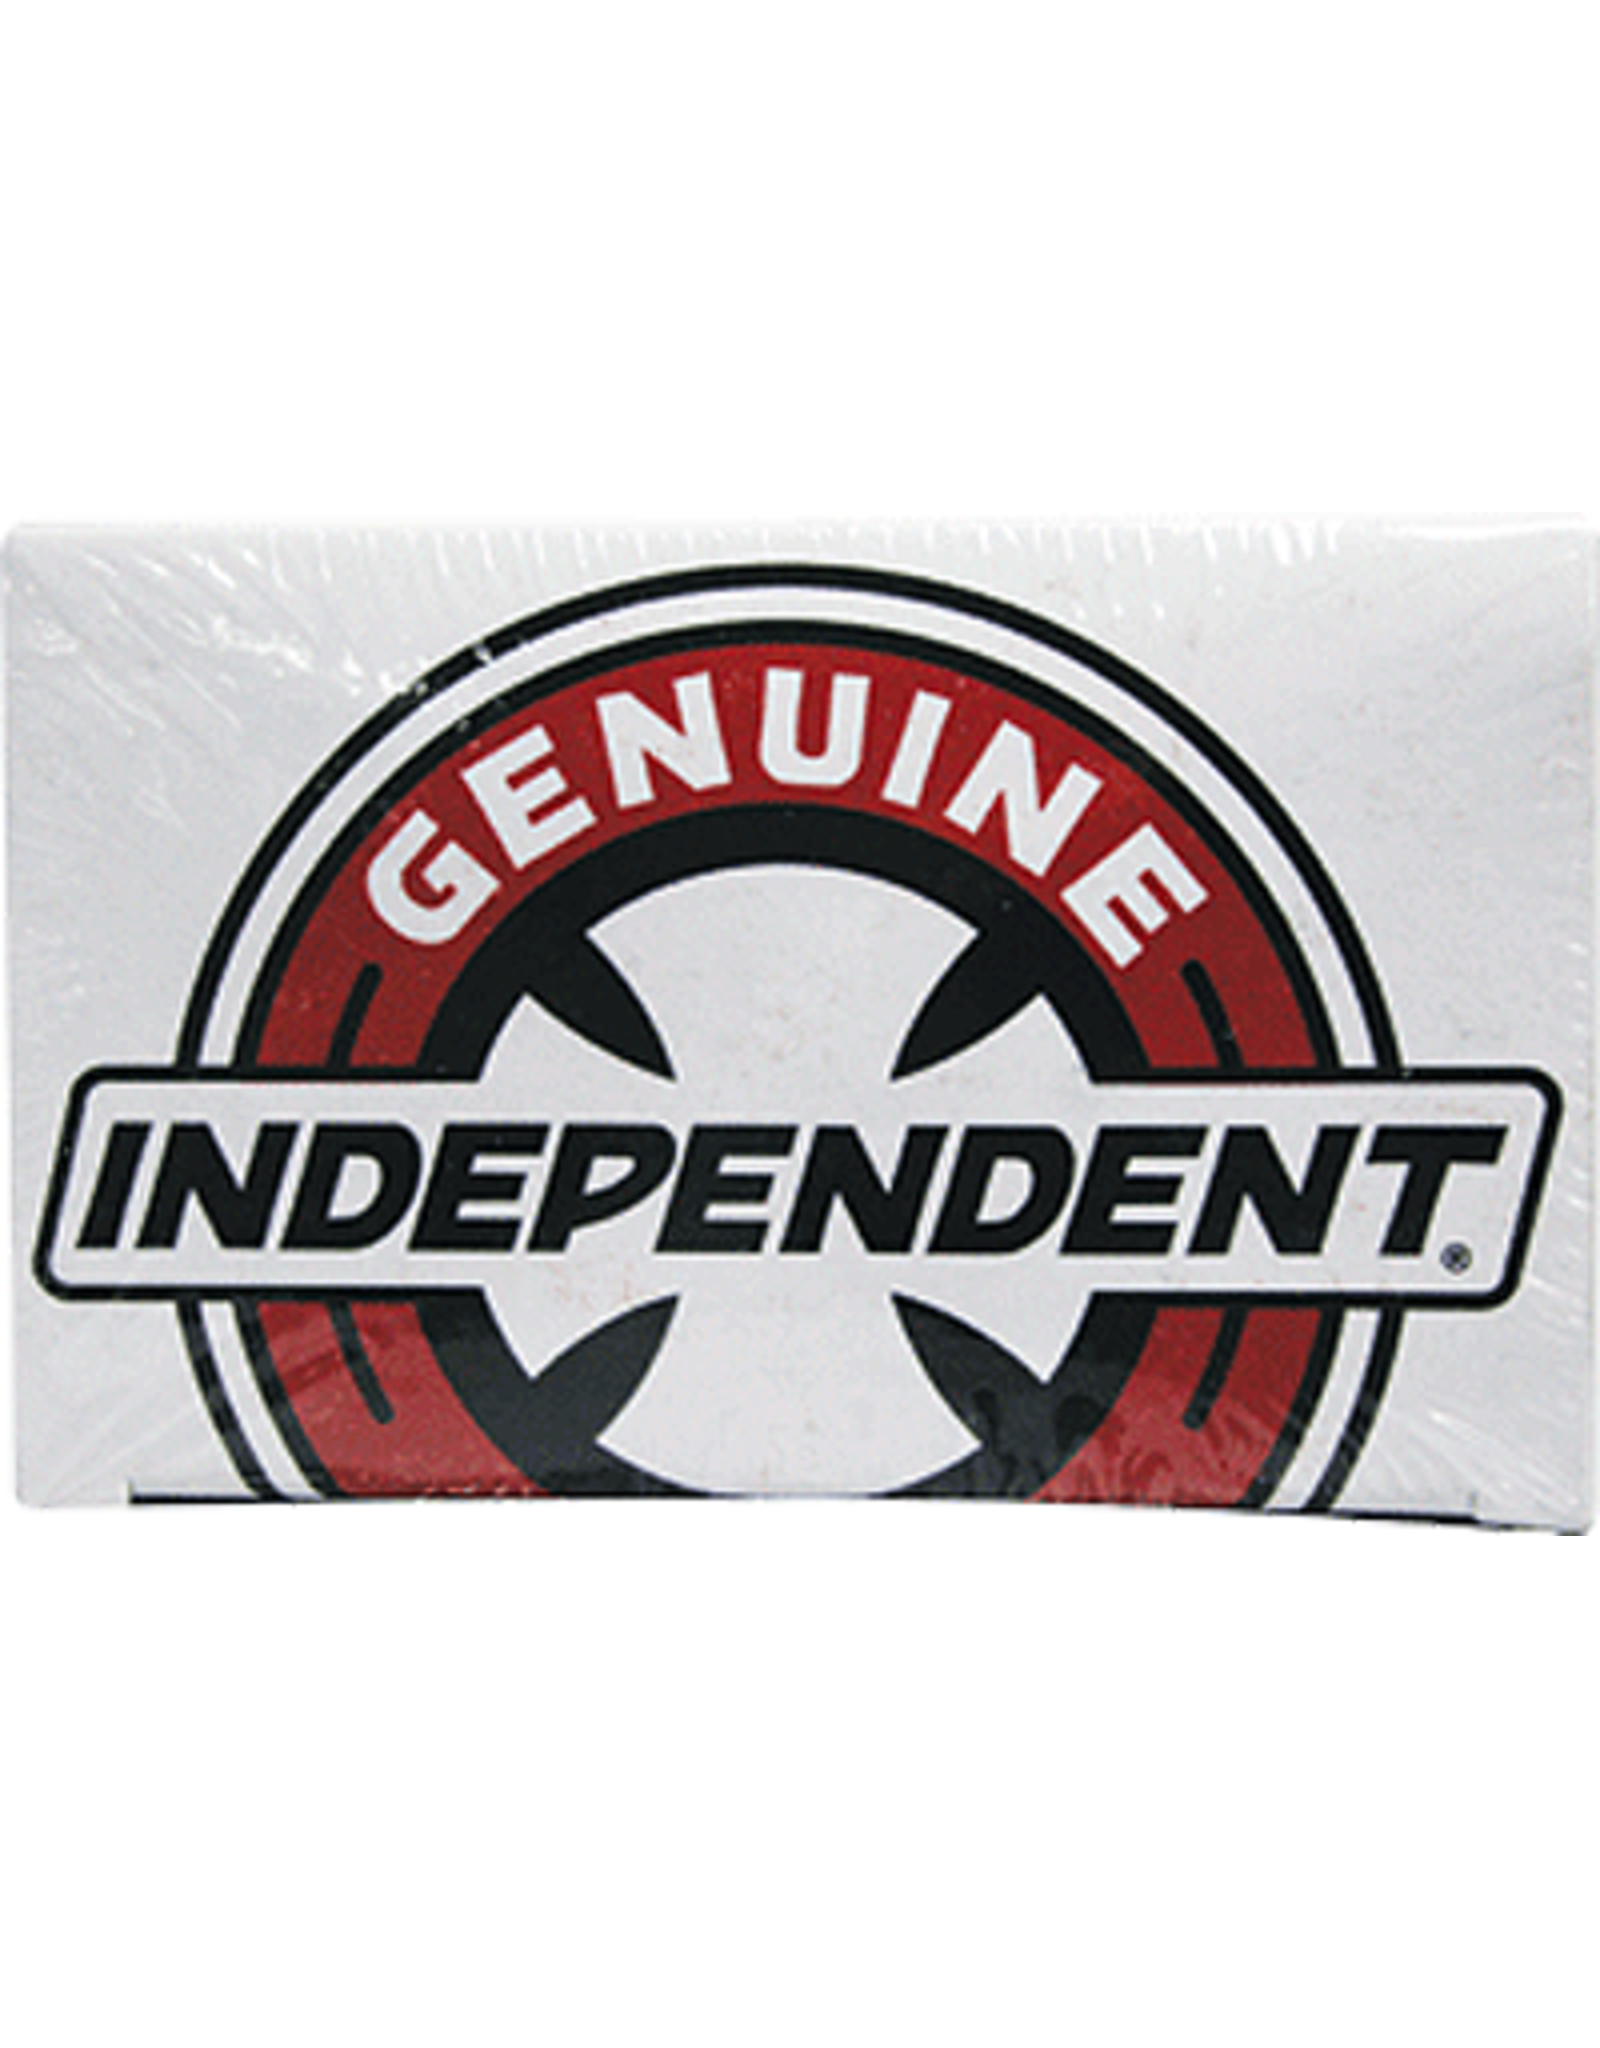 INDEPENDENT GENUINE AXLE NUTS [48/PACK]